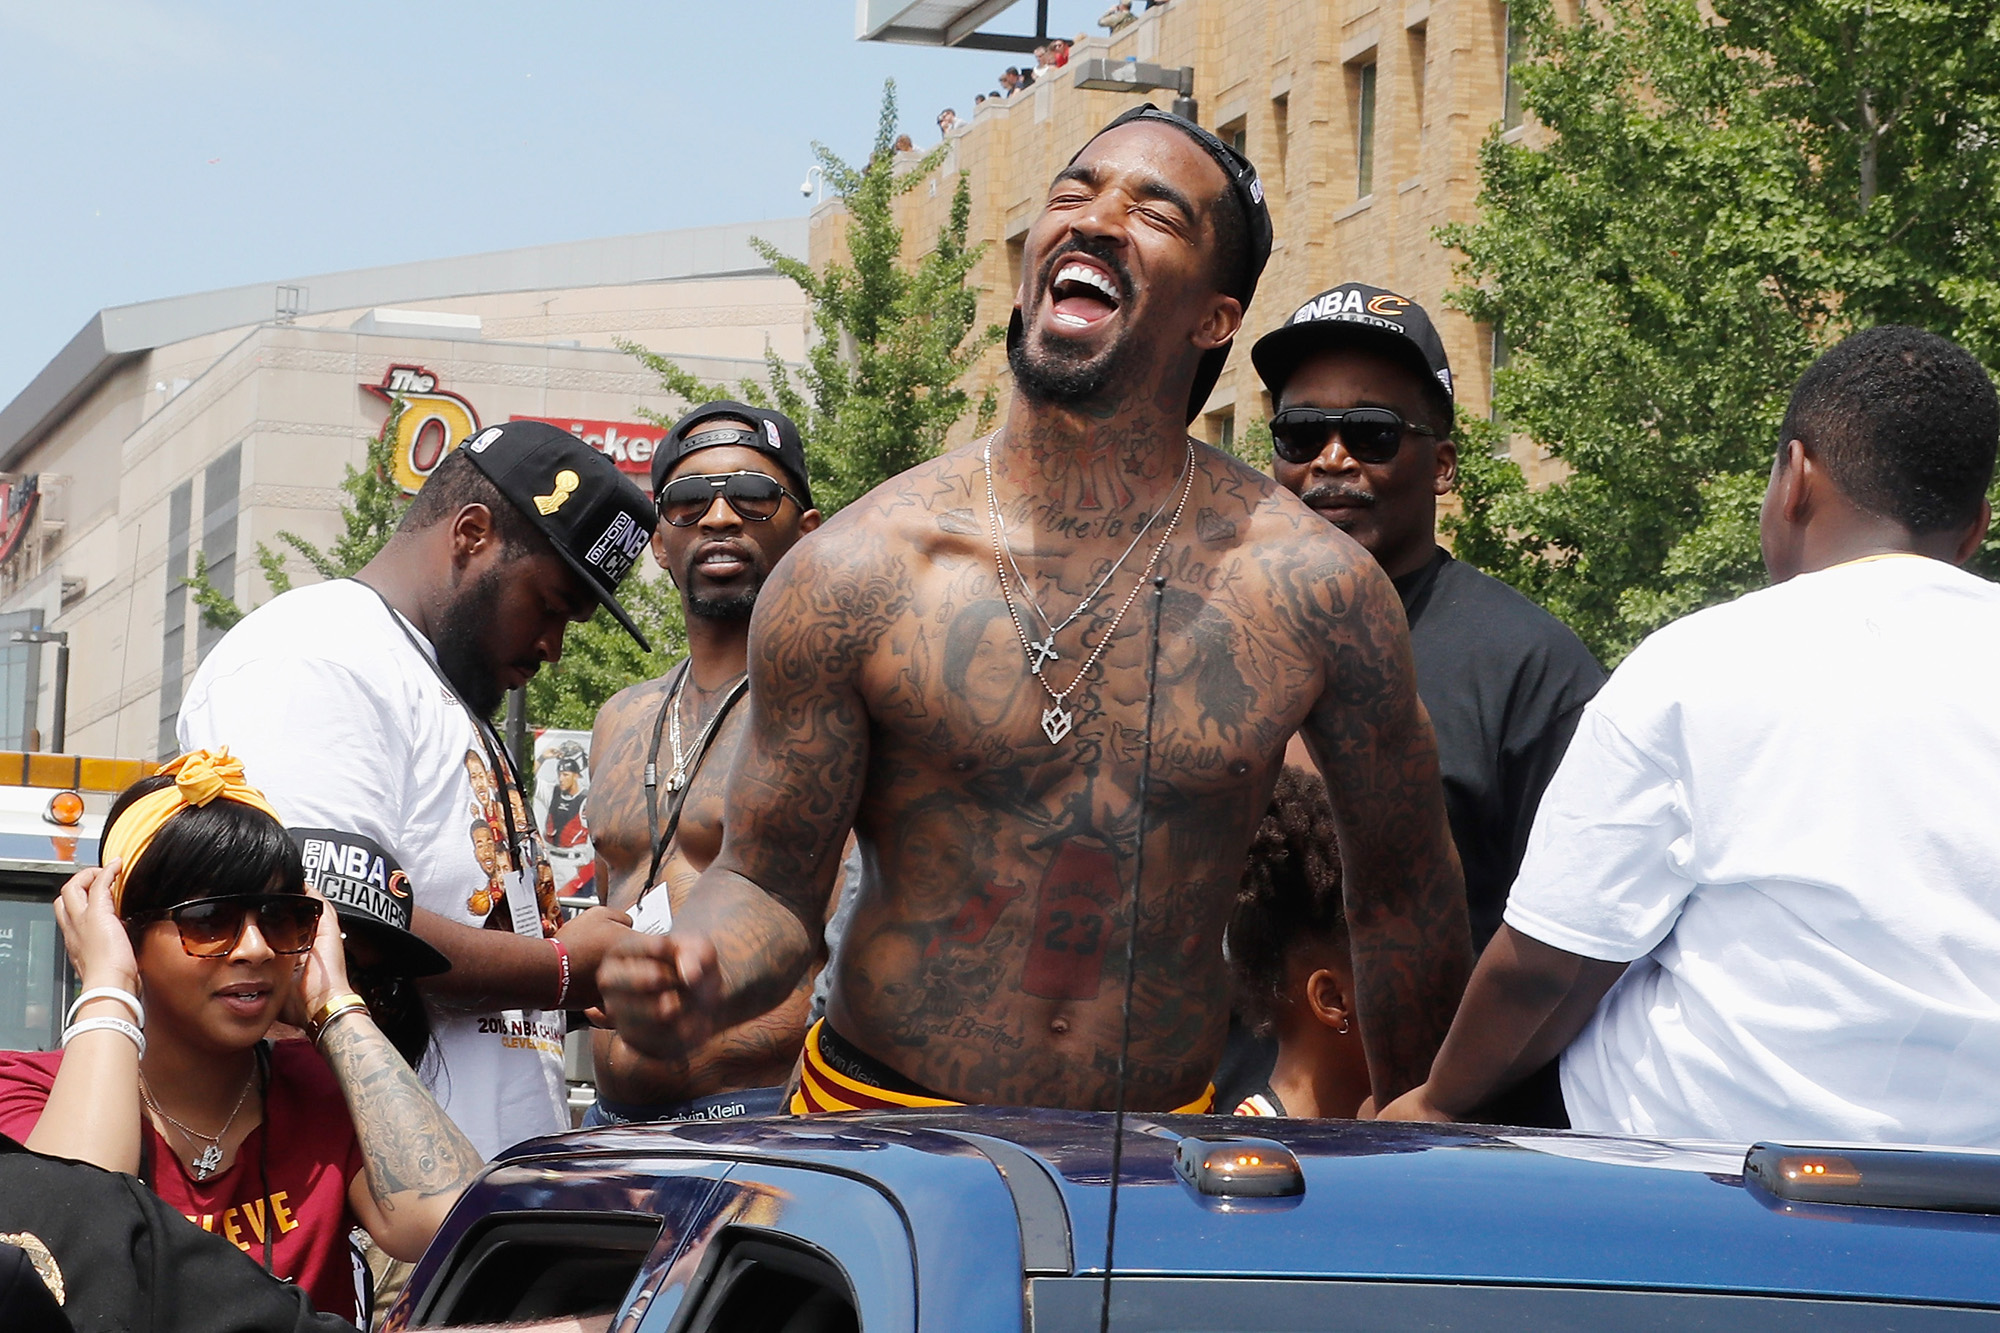 CLEVELAND, OH - JUNE 22:  J.R. Smith #5 of the Cleveland Cavaliers waves at fans during the Cleveland Cavaliers Victory Parade And Rally on June 22, 2016 in downtown Cleveland, Ohio.  NOTE TO USER: User expressly acknowledges and agrees that, by downloading and/or using this Photograph, user is consenting to the terms and conditions of the Getty Images License Agreement. Mandatory Copyright Notice: Copyright 2016 NBAE  (Photo by Gregory Shamus/NBAE/Getty Images)